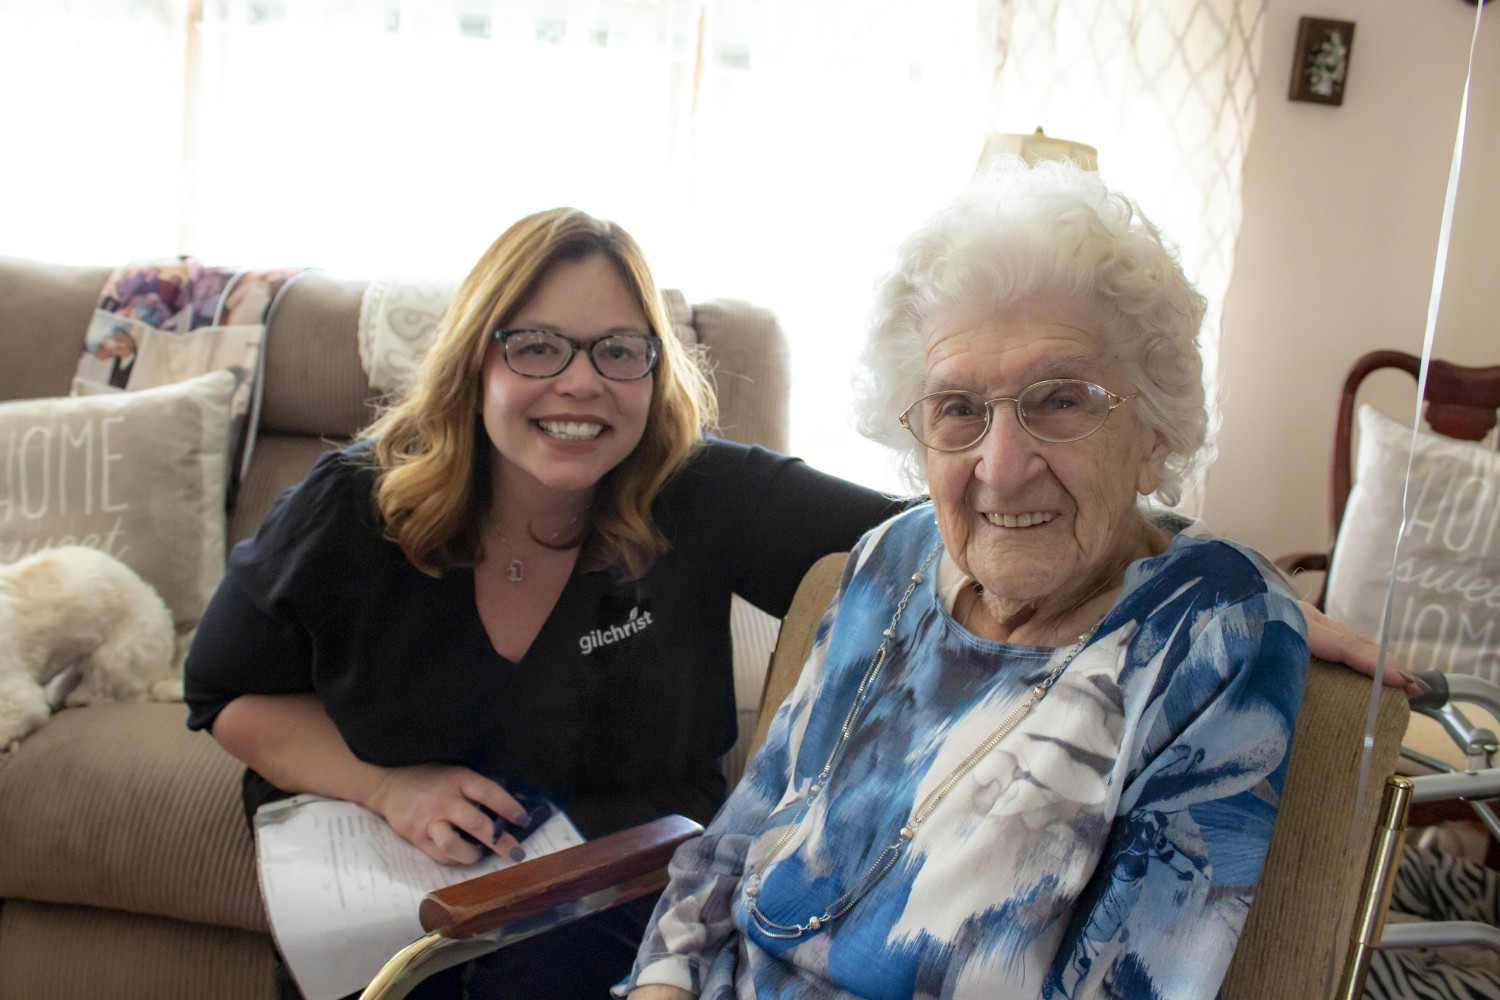 Gilchrist social worker visits a hospice patient in her home to provide counseling and help secure community resources. 